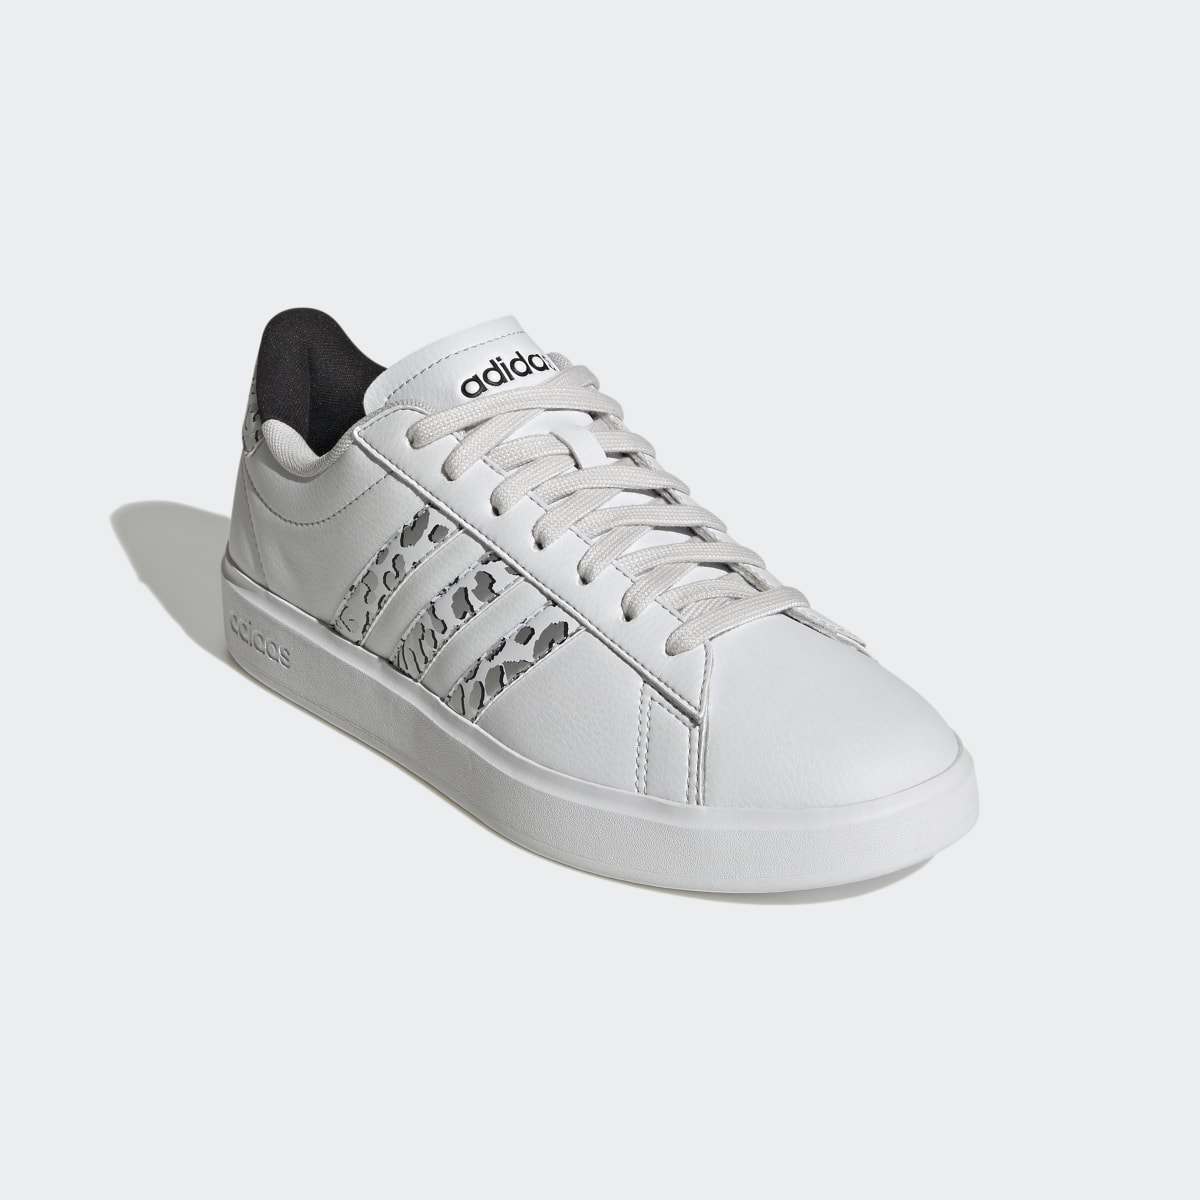 Adidas Grand Court Cloudfoam Lifestyle Court Comfort Style Shoes. 5